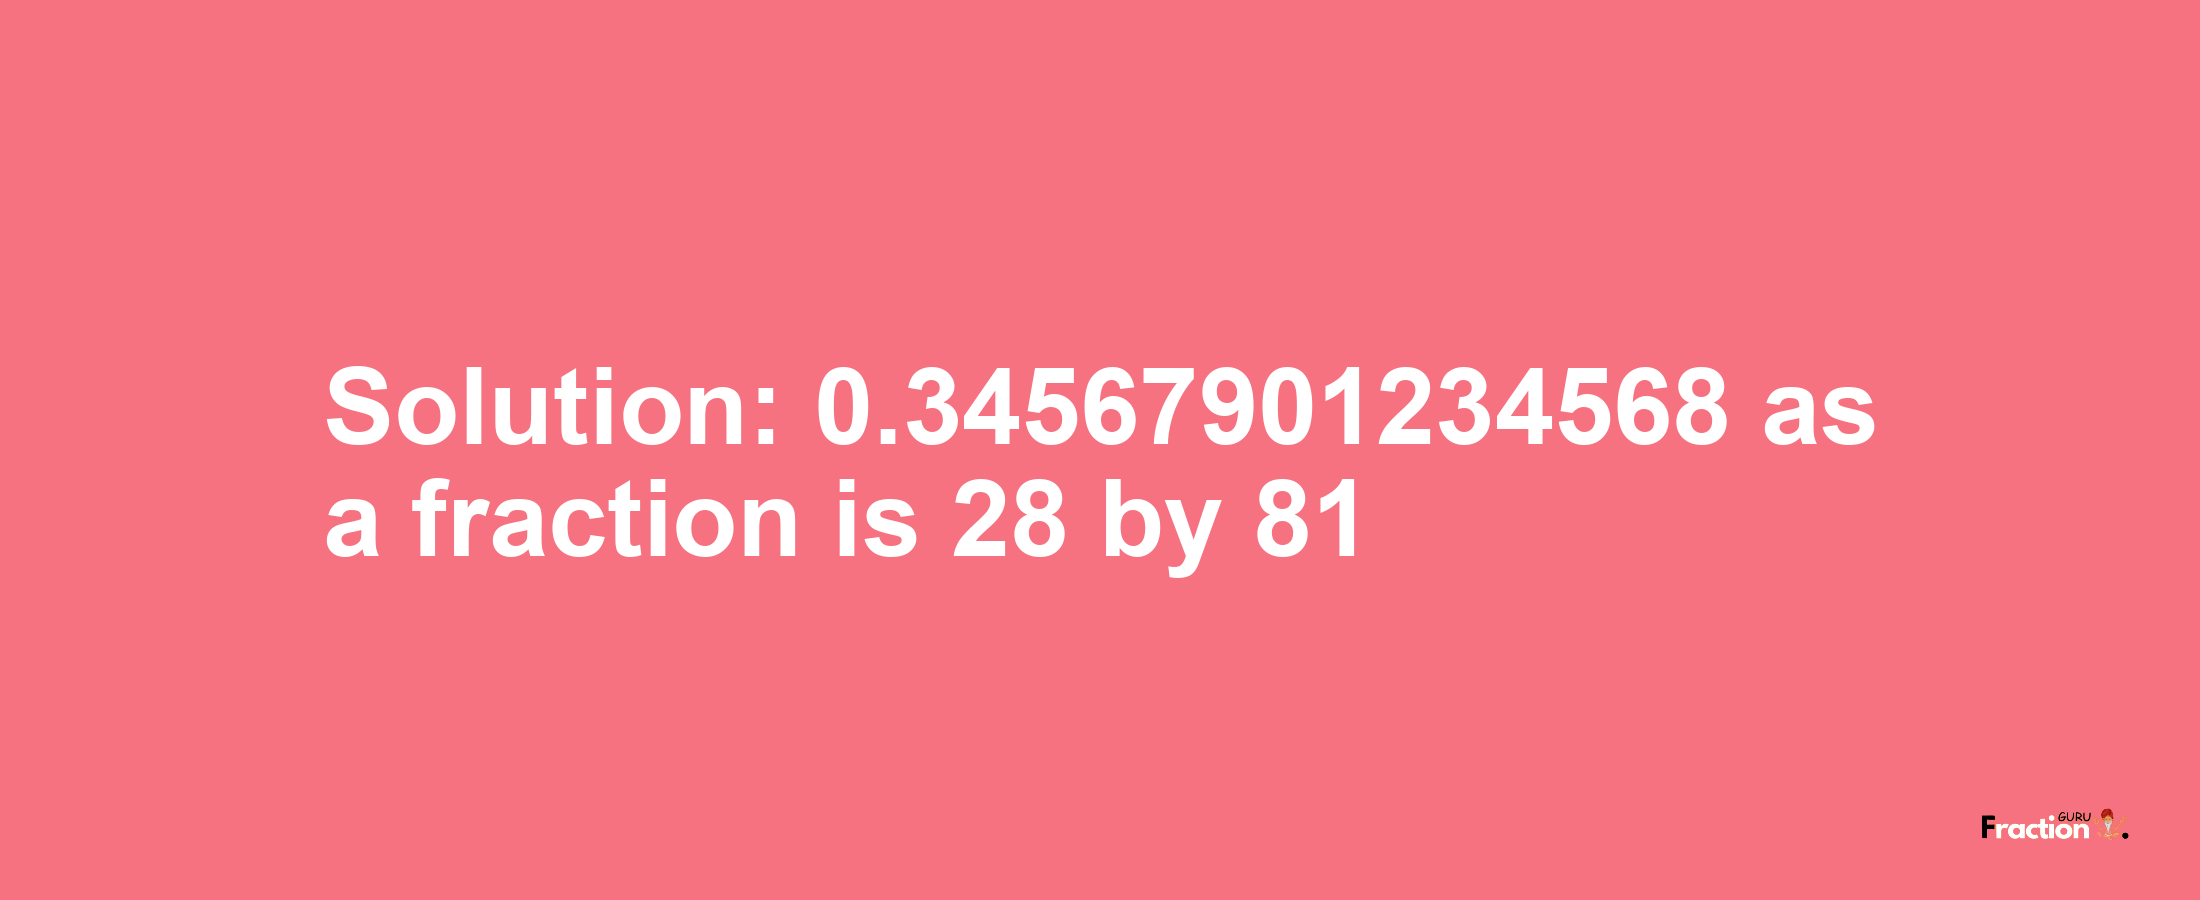 Solution:0.34567901234568 as a fraction is 28/81